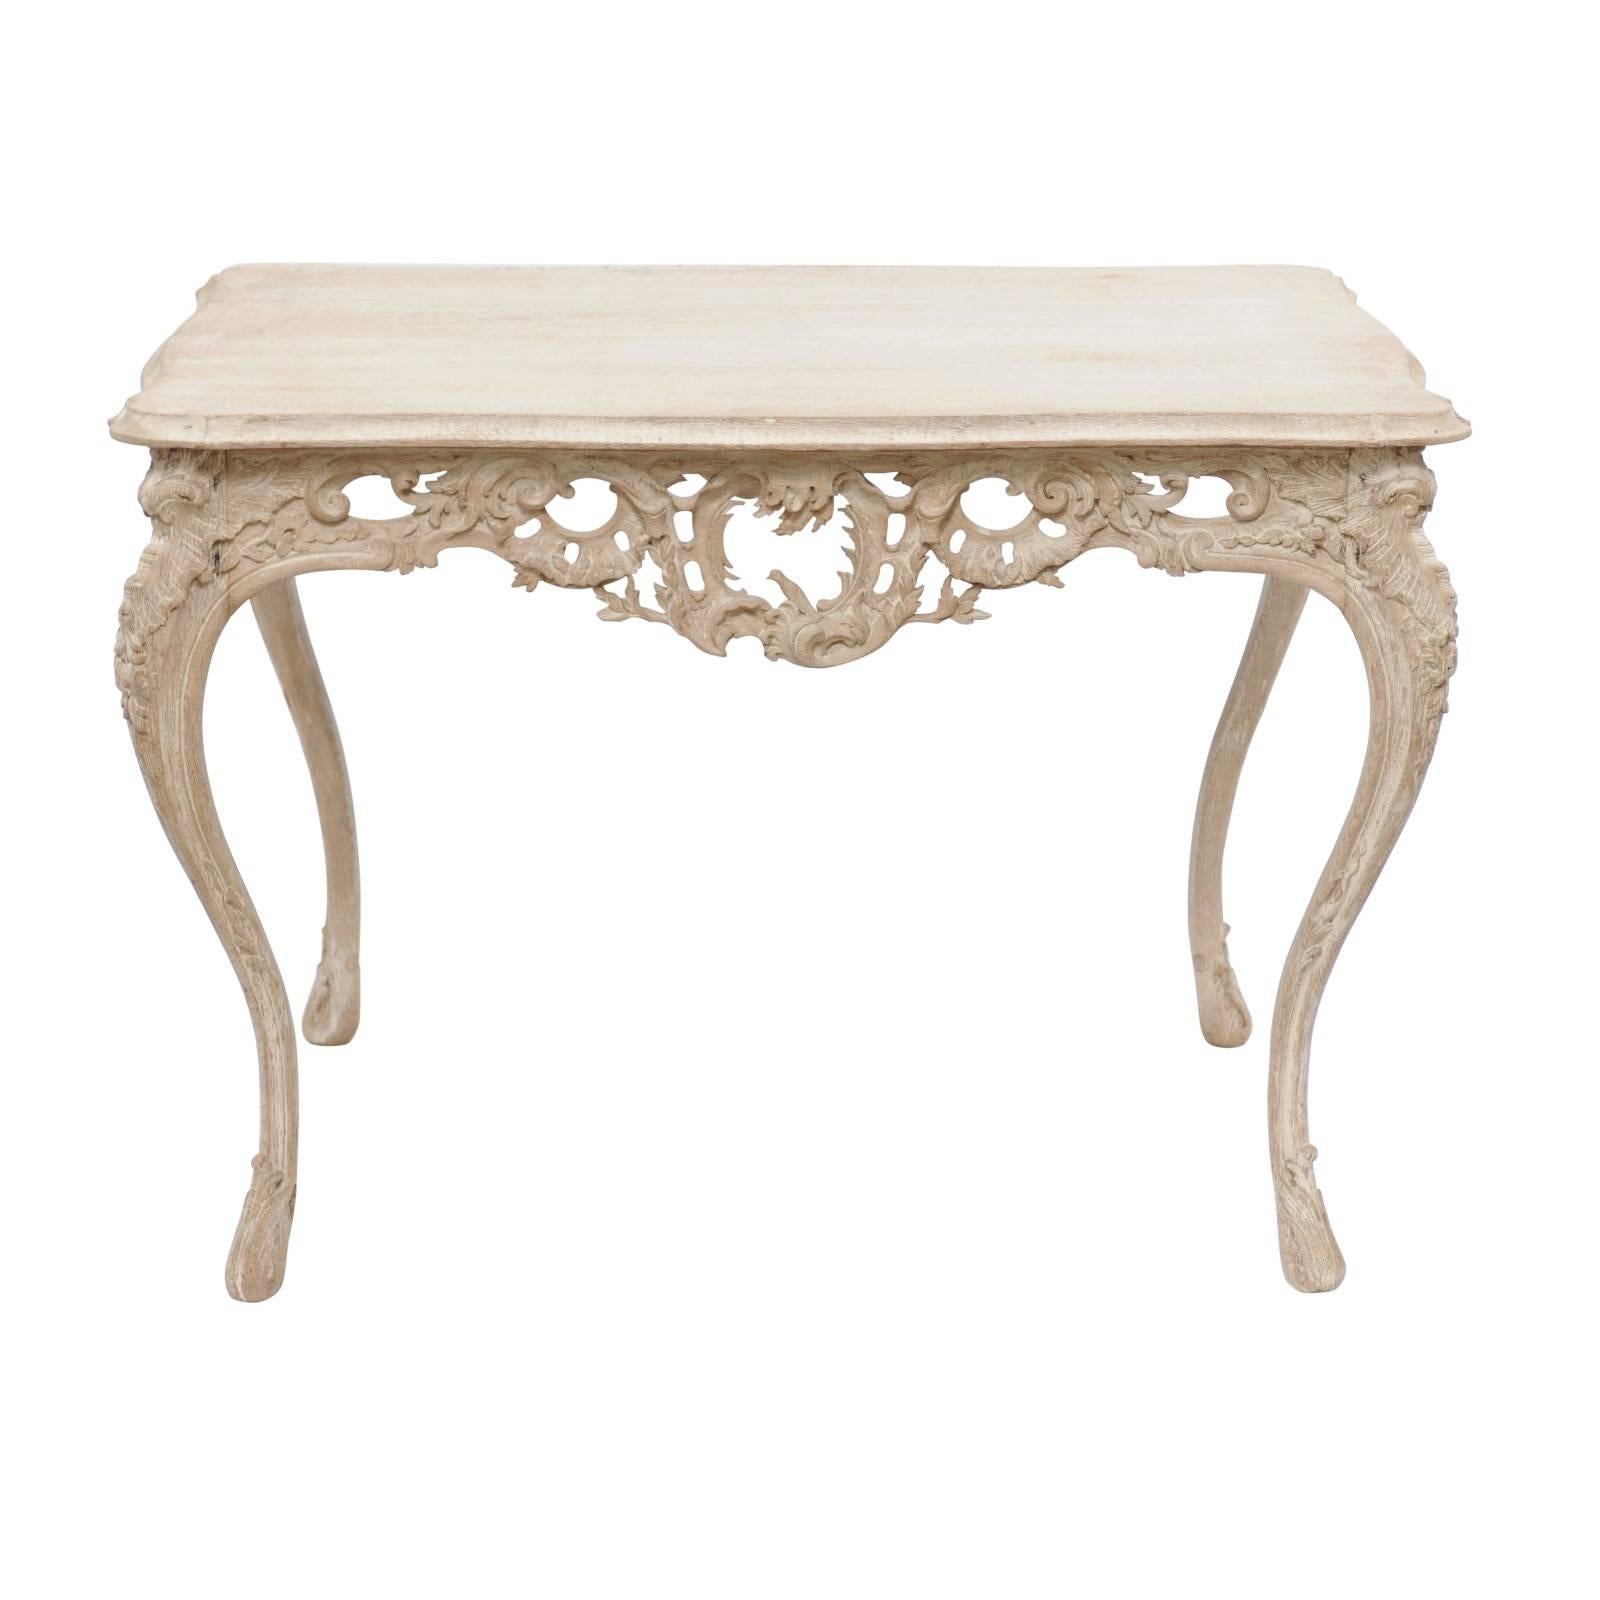 French Louis XV Style Stripped Oak Side Table with Carved Apron, Cabriole Legs